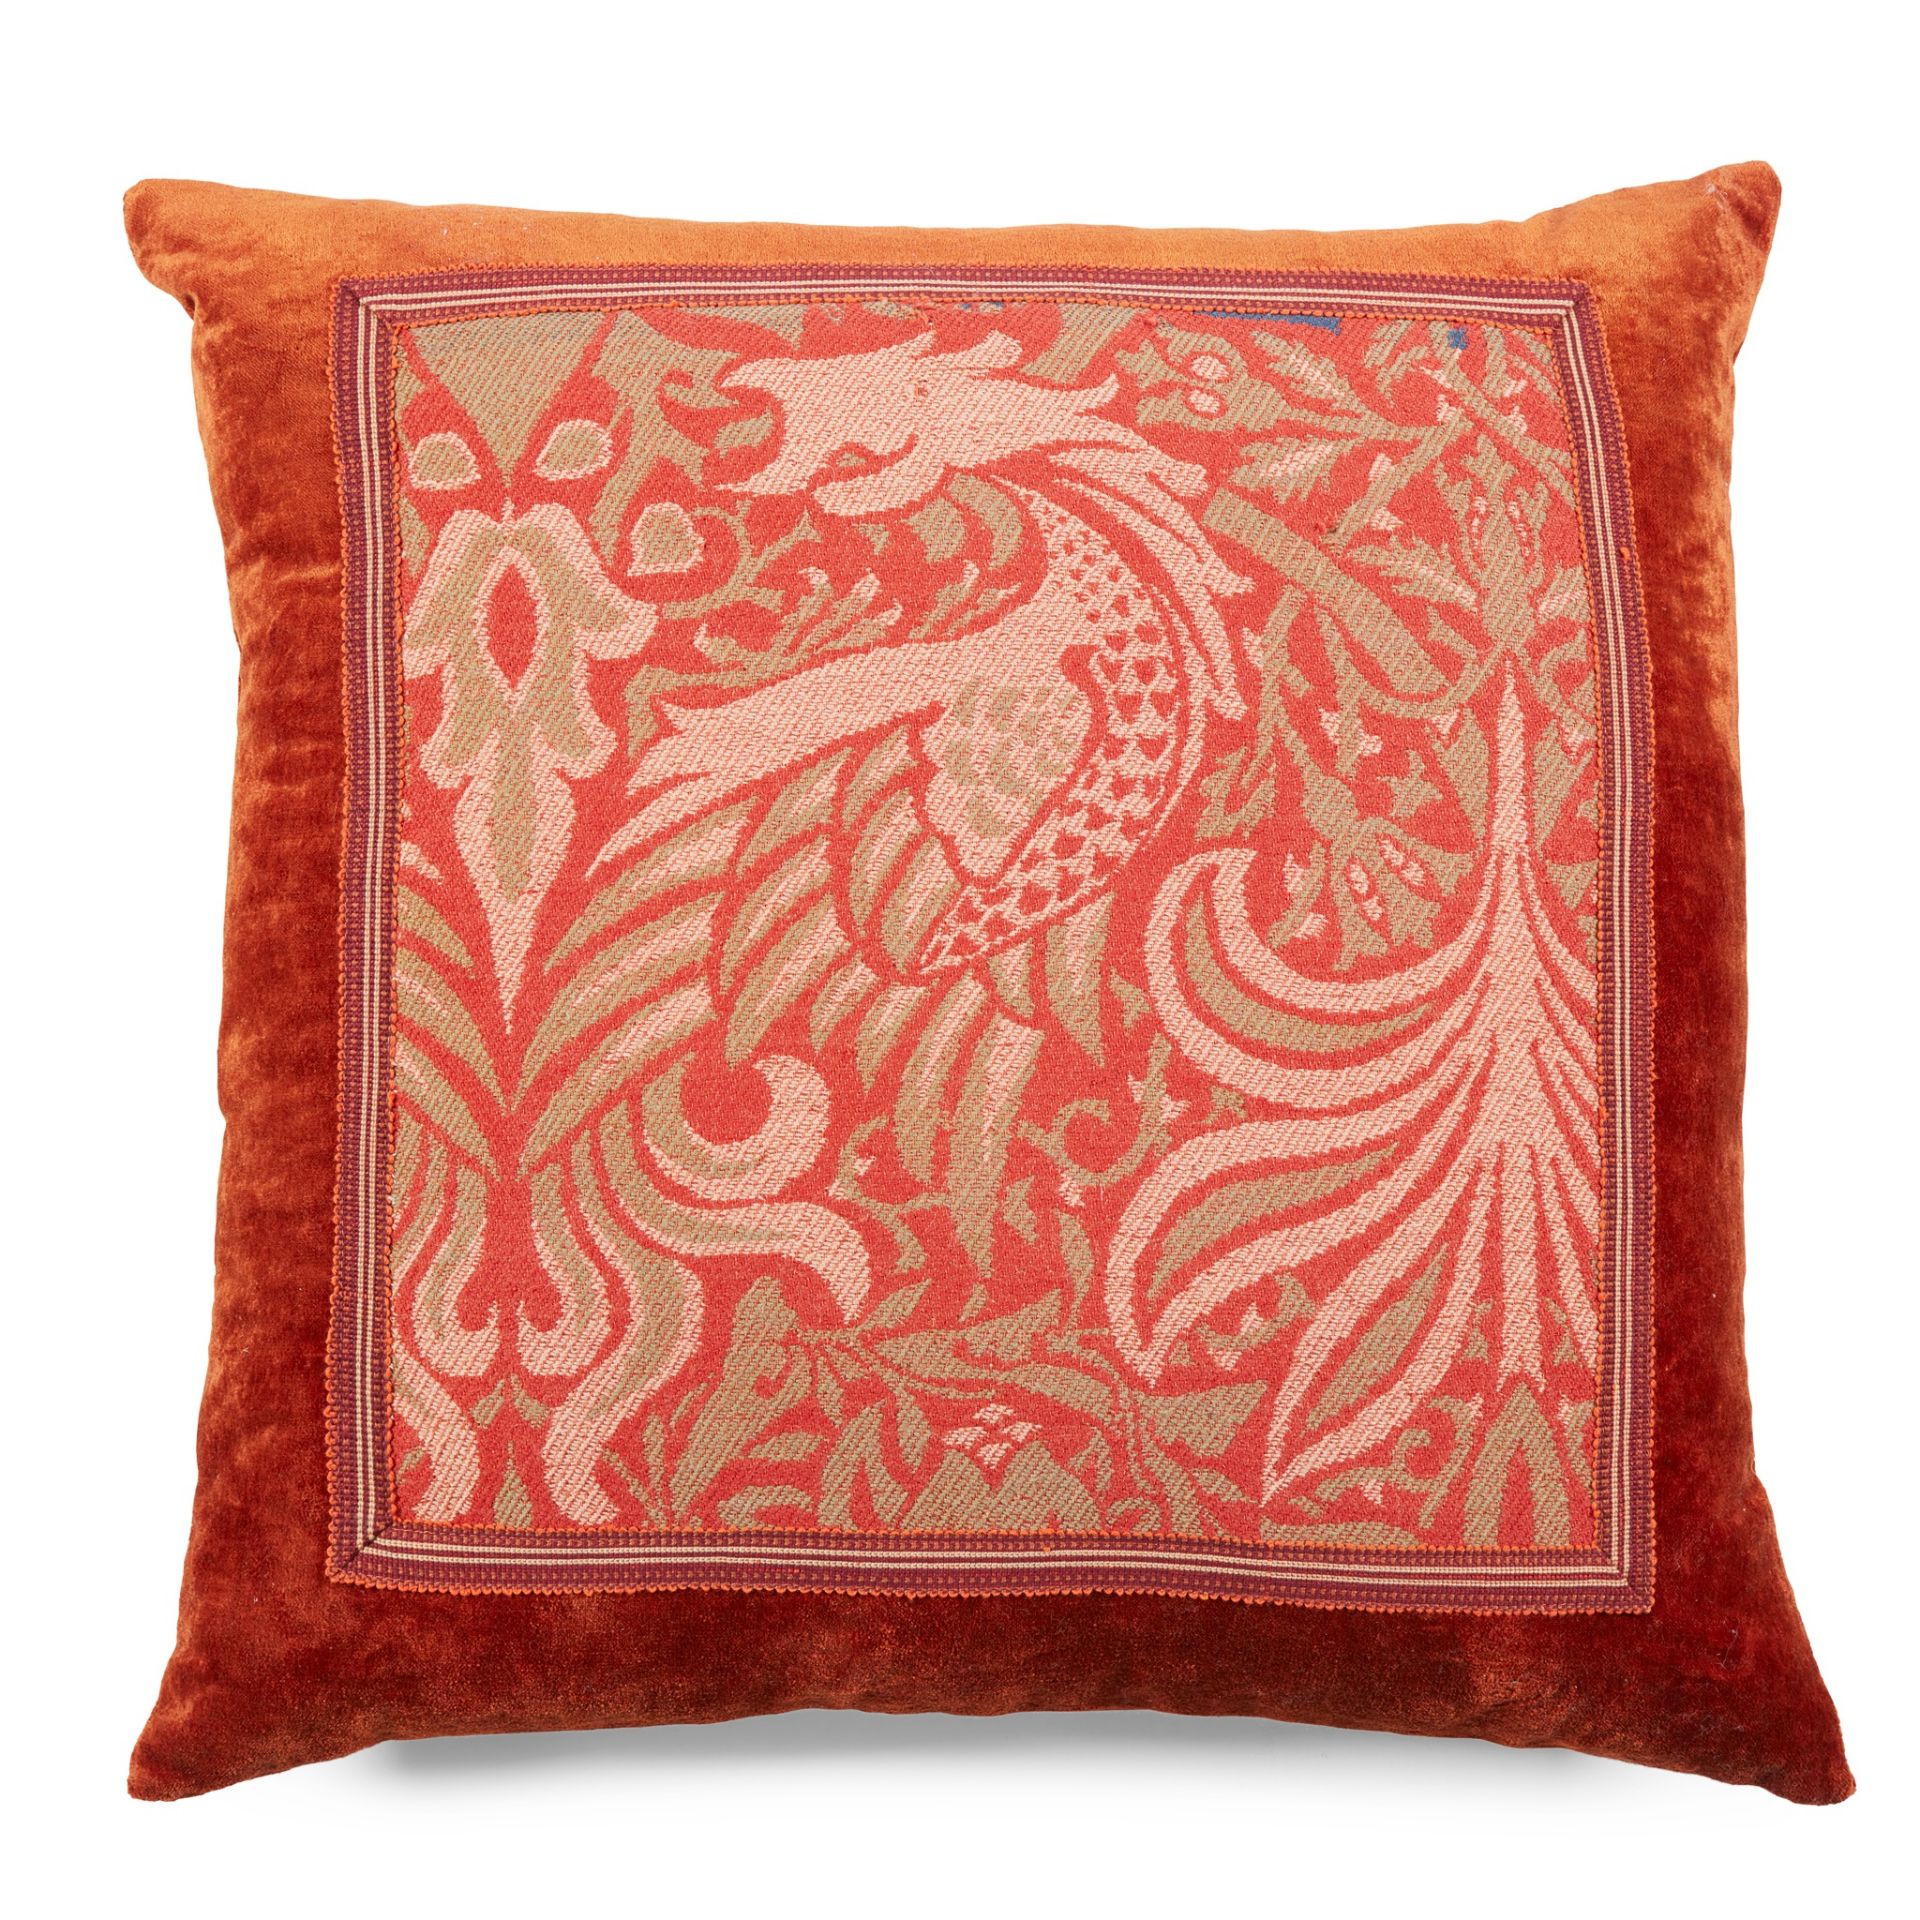 WILLIAM MORRIS (1834-1896) FOR MORRIS & CO. THREE ARTS & CRAFTS ‘PEACOCK & DRAGON’ PATTERN CUSHIONS, - Image 2 of 7